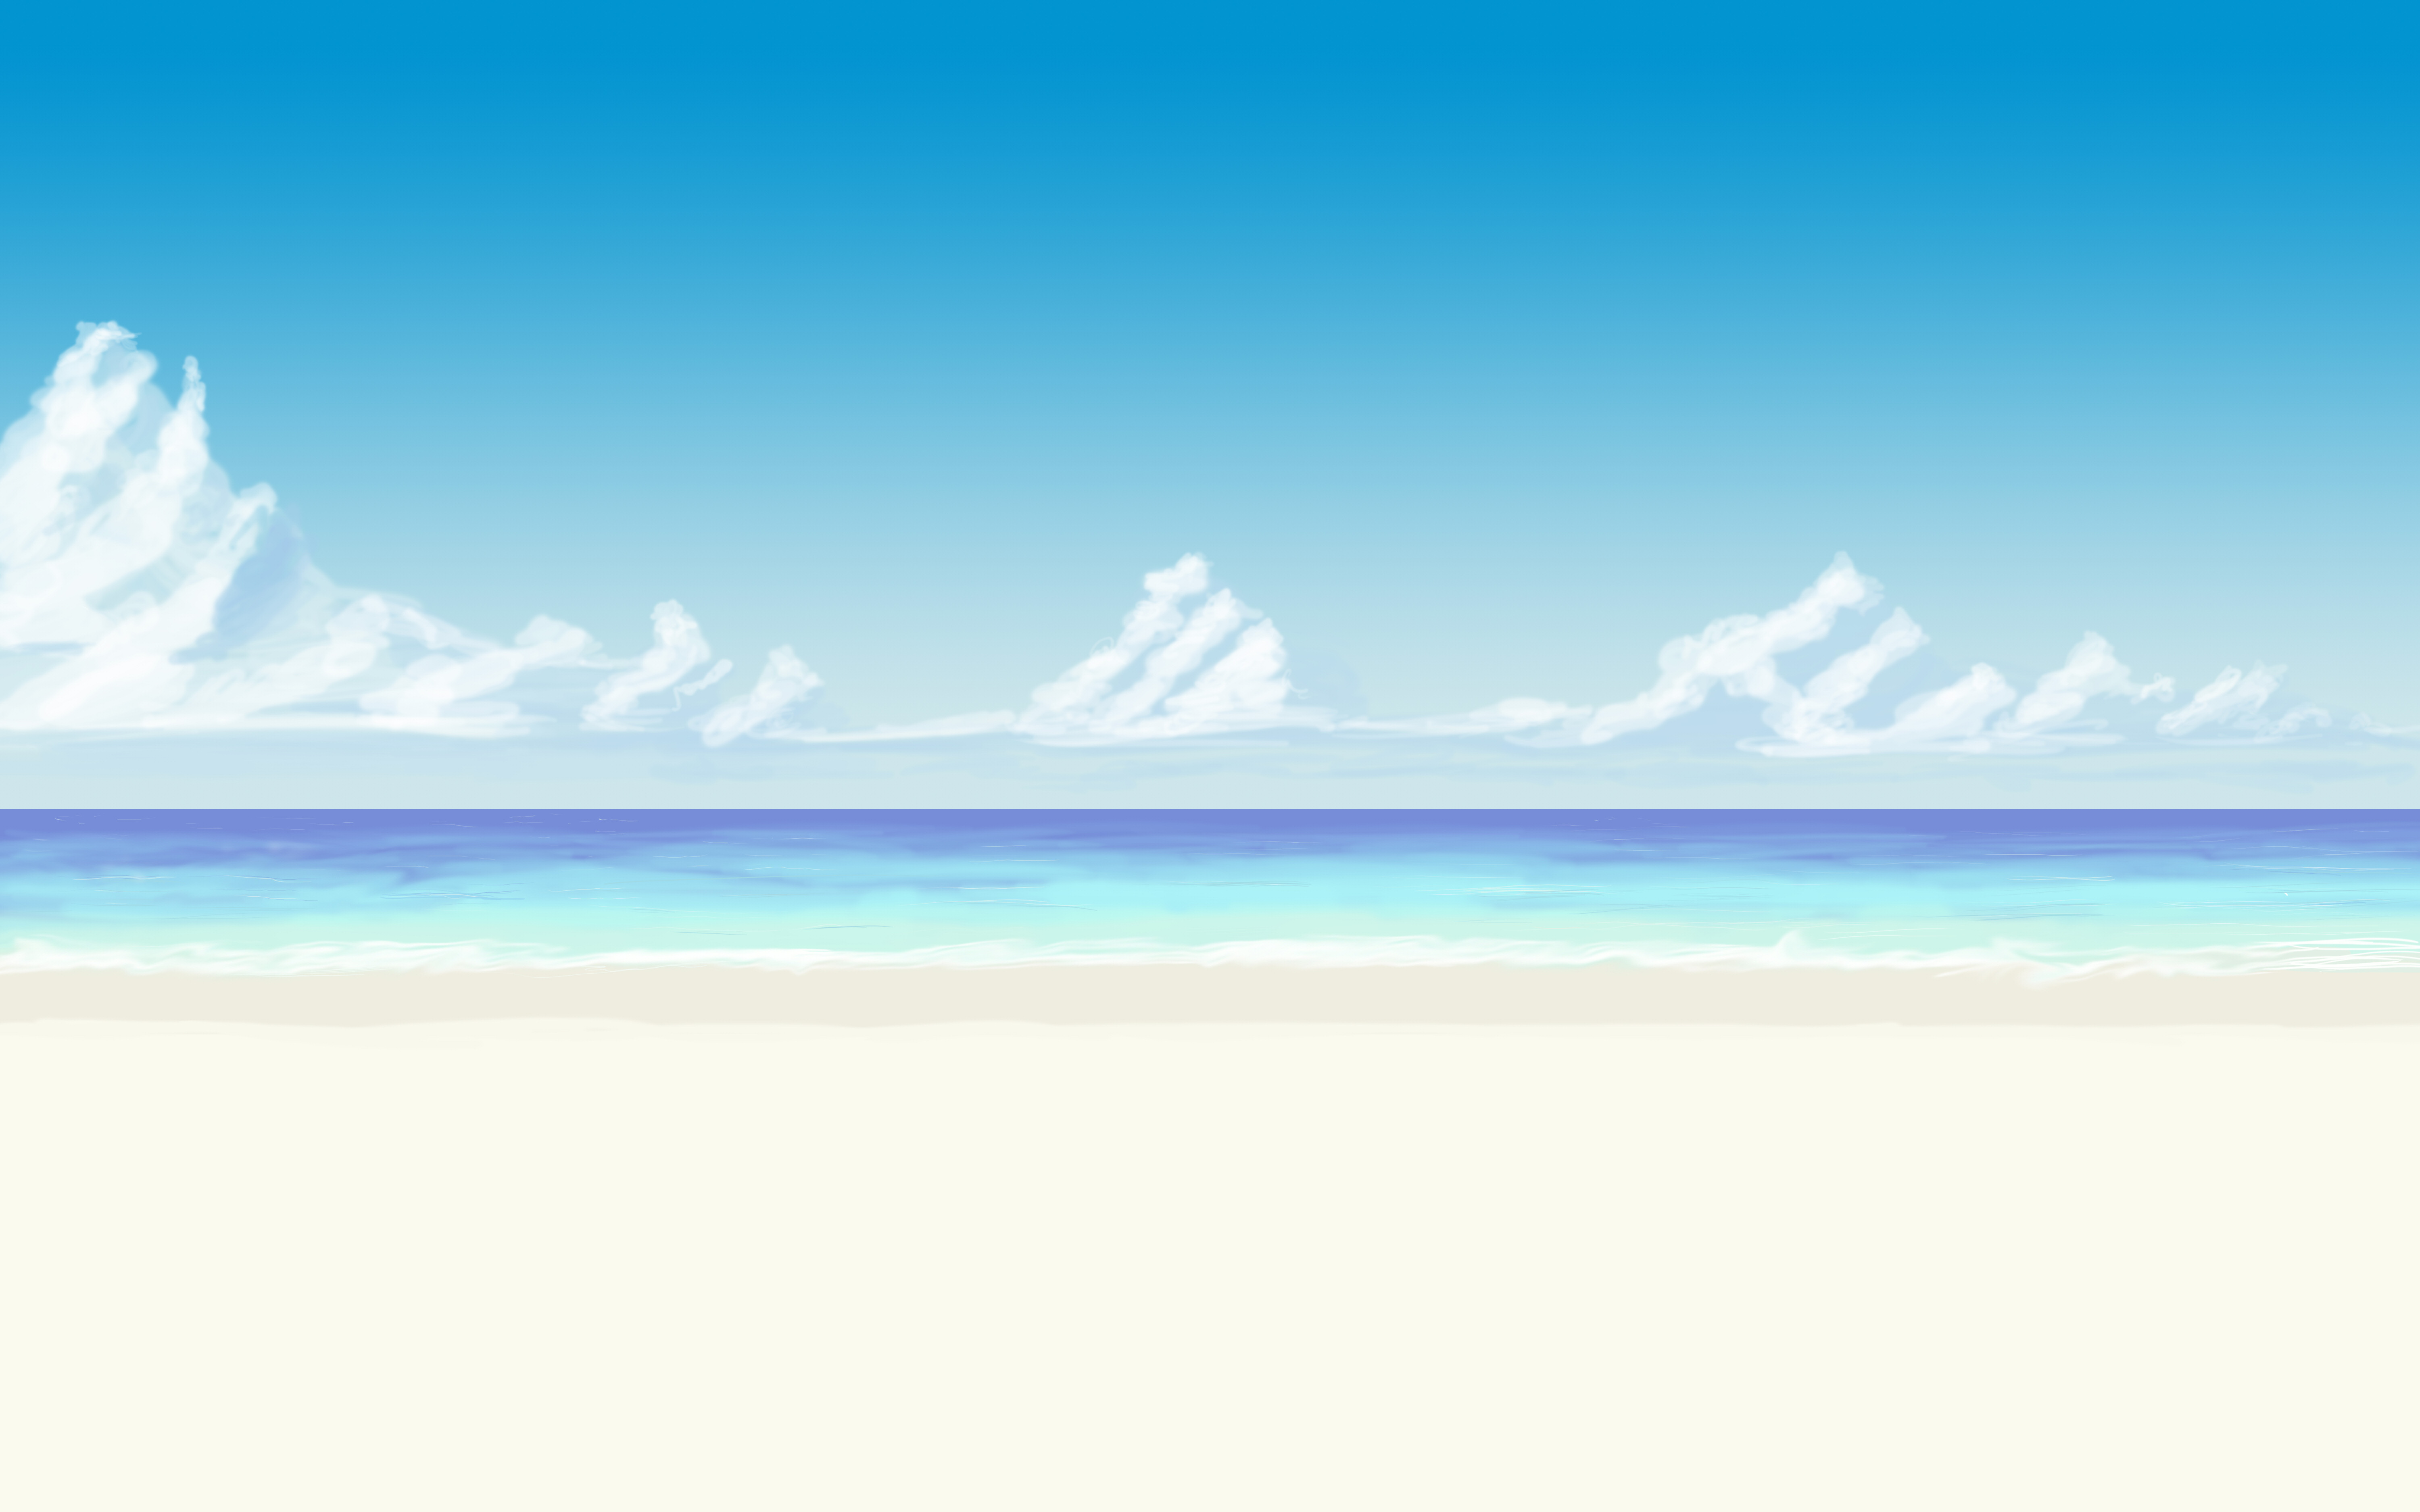 Another Anime Beach Background By Wbd